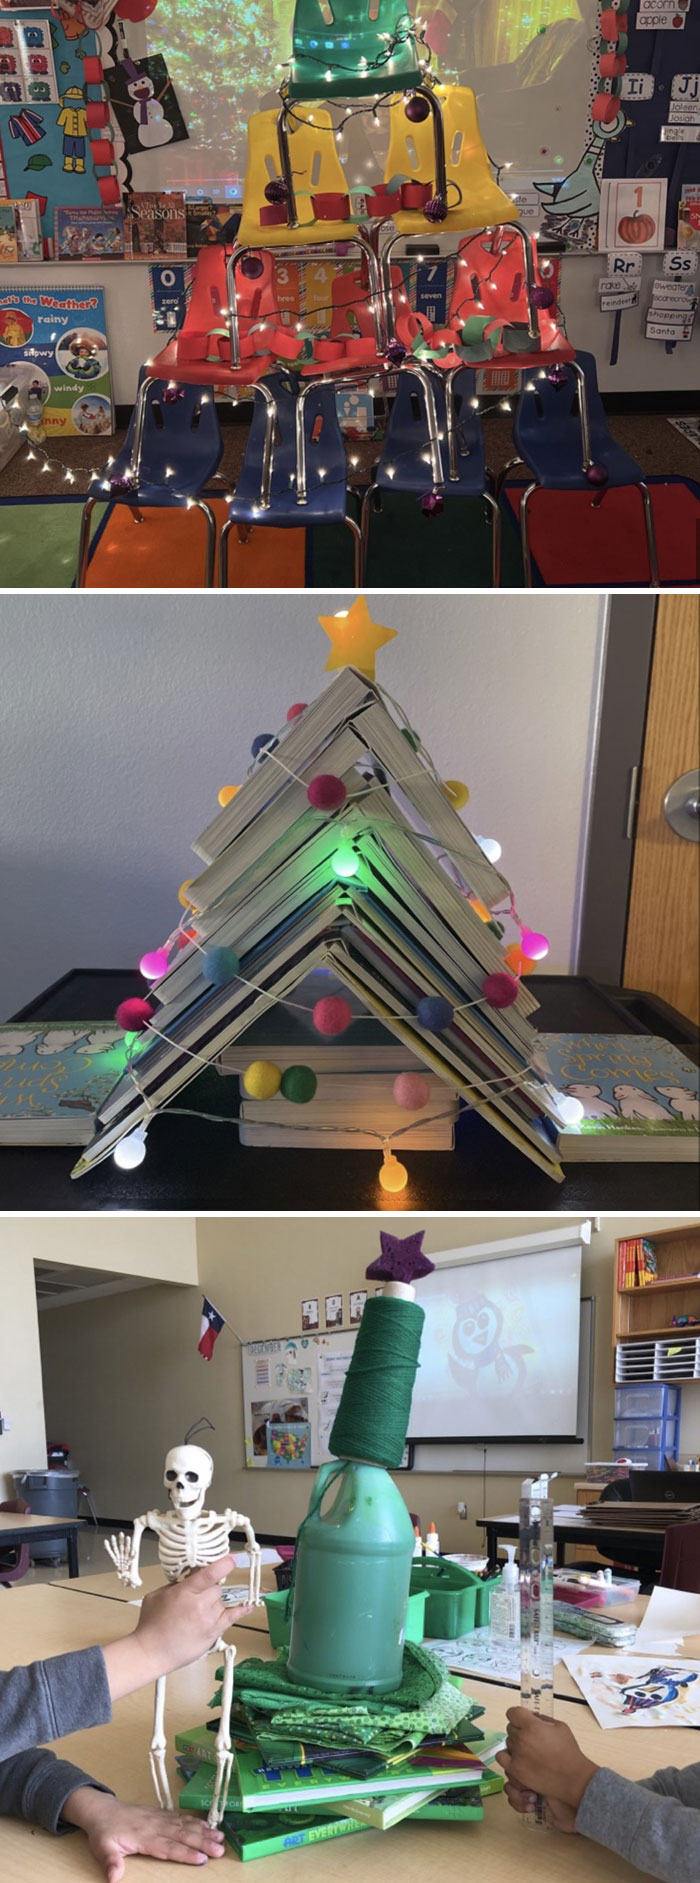 Teachers Got Creative With The “Oh Christmas Tree” Challenge